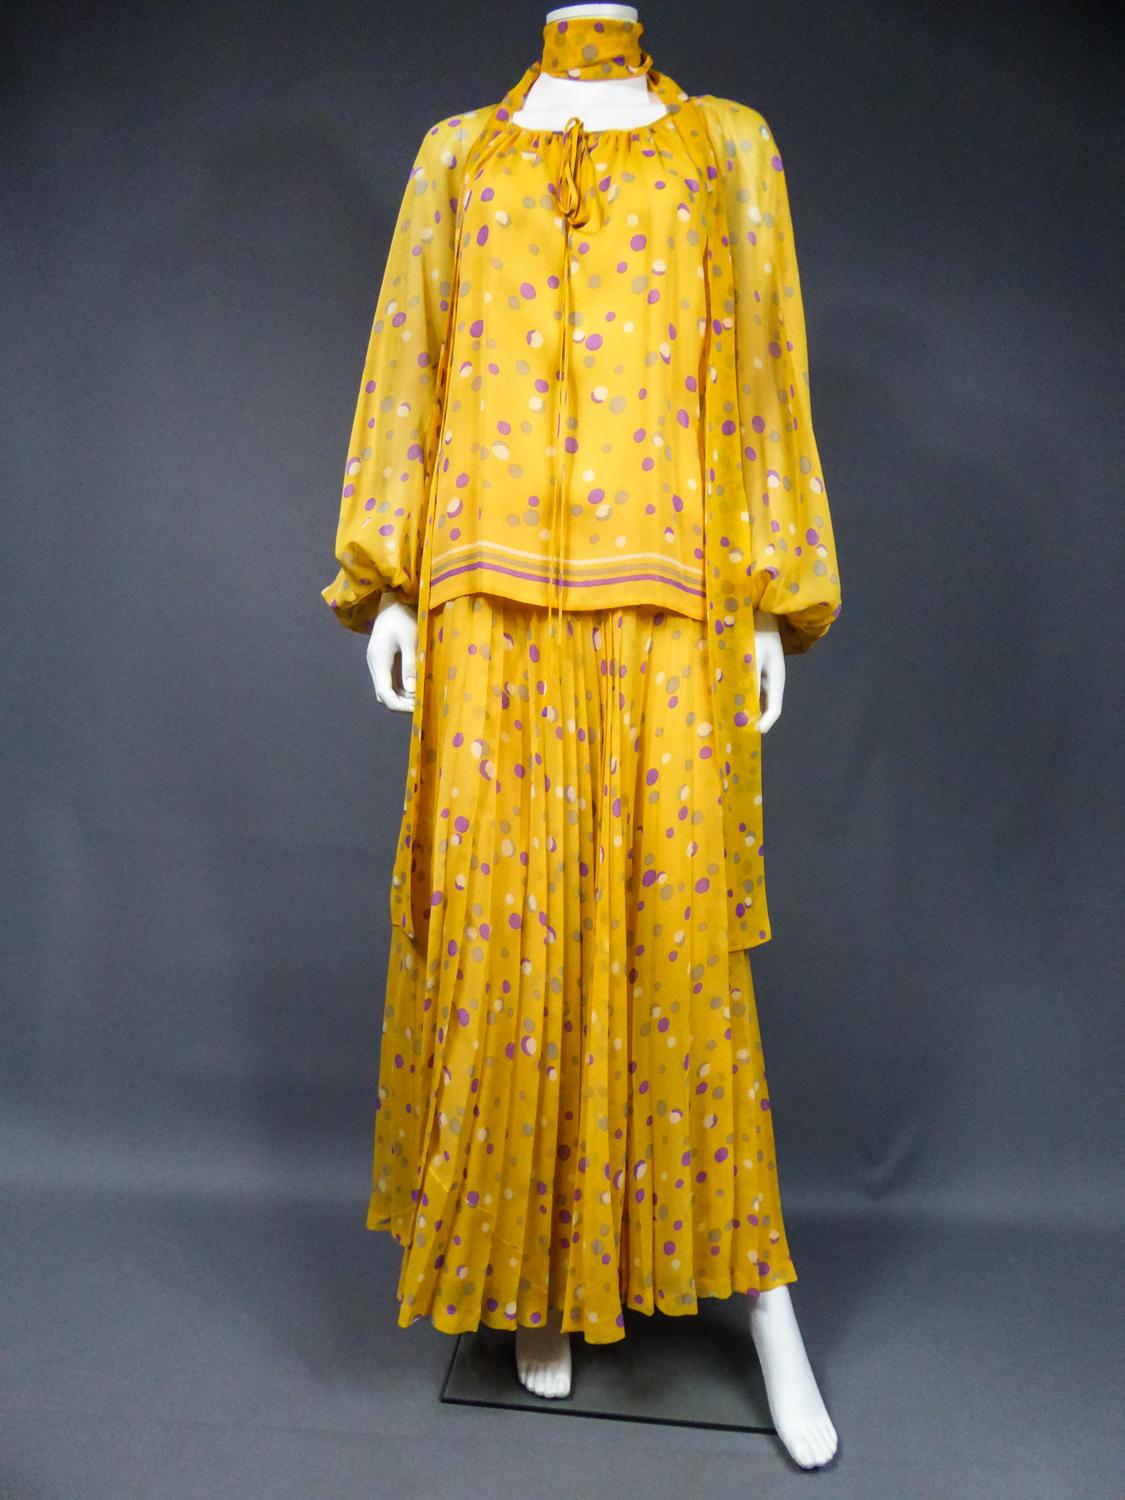 Women's Yves Saint Laurent Couture Chiffon Blouse and Skirt Numbered 39377 Circa 1975